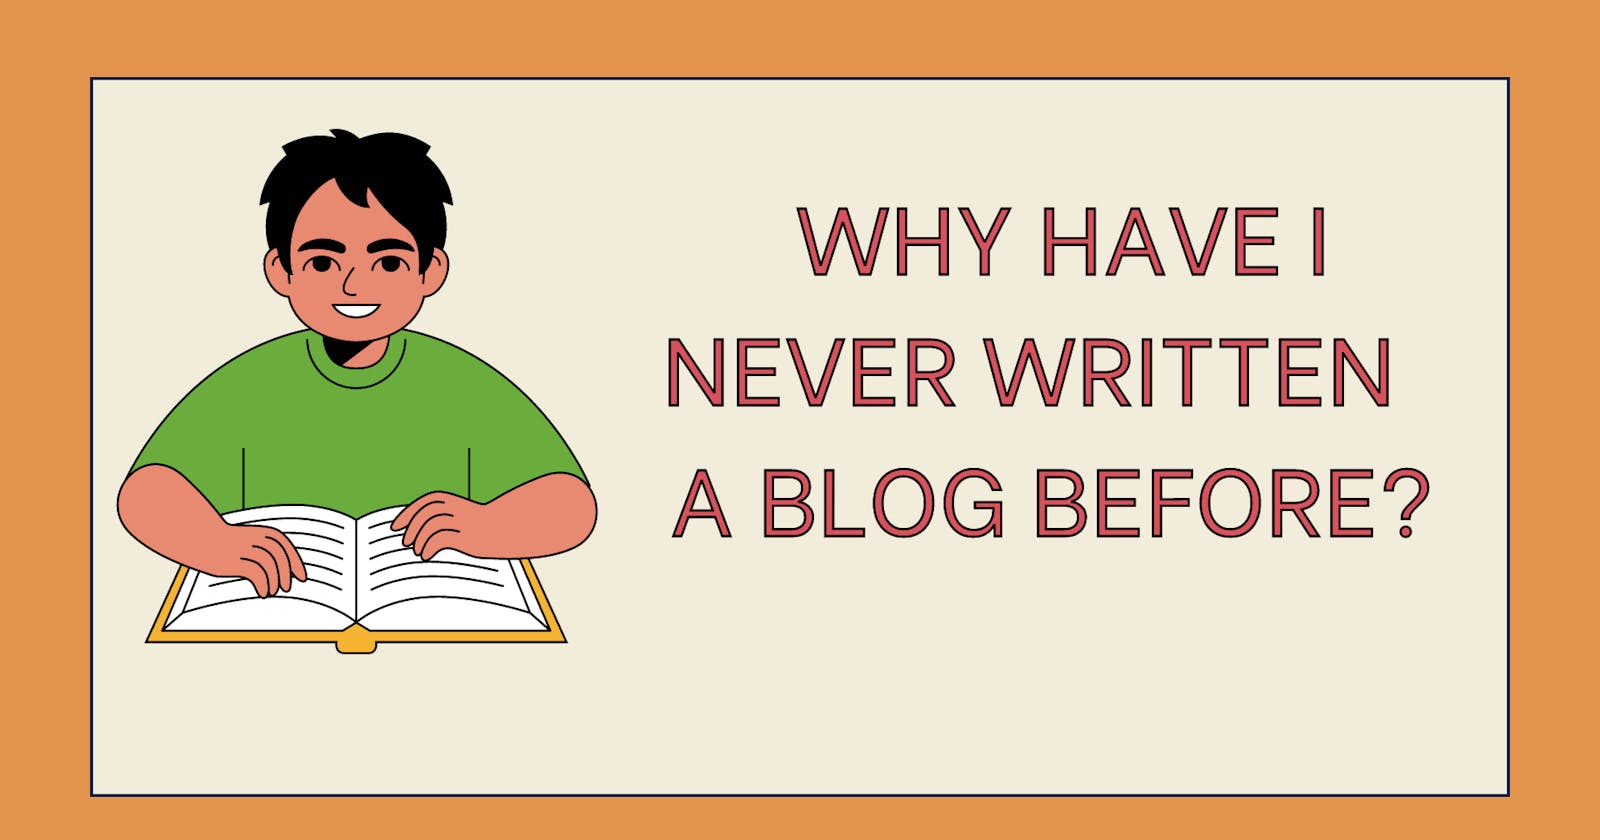 Why Have I Never Written A Blog Before?